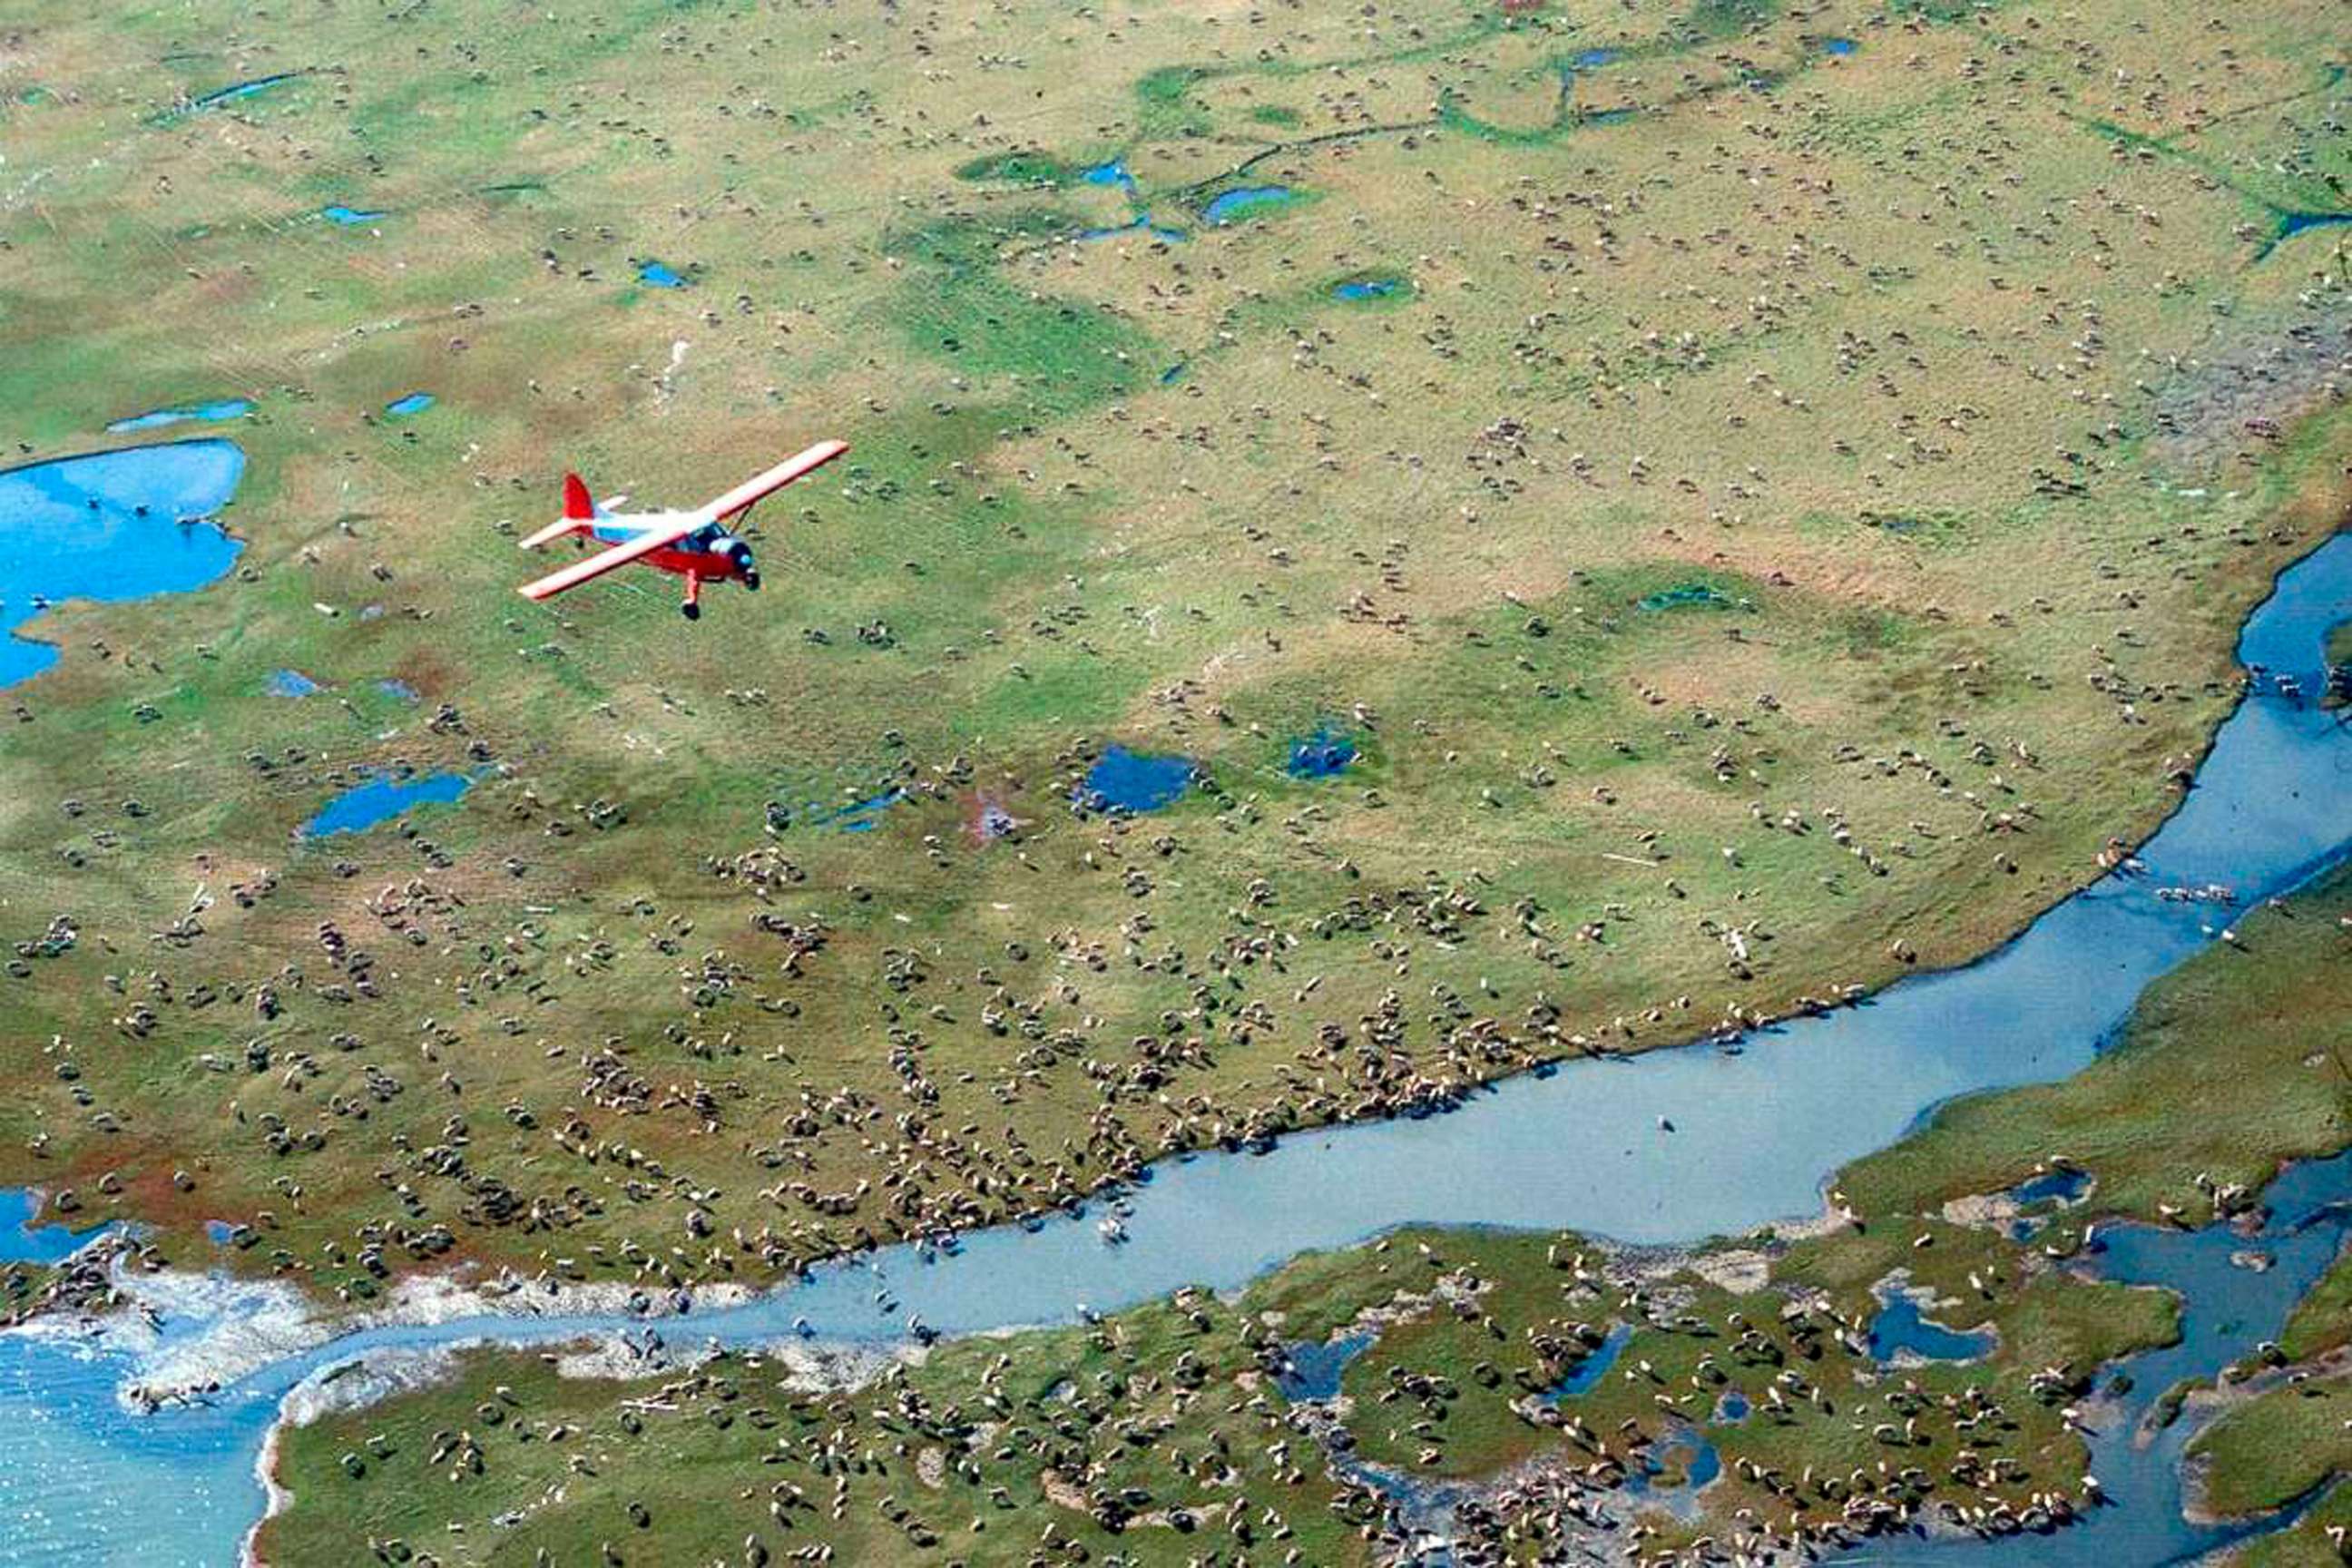 PHOTO: An airplane flies over caribou from the Porcupine Caribou Herd on the coastal plain of the Arctic National Wildlife Refuge in northeast Alaska, in an undated handout photo from the U.S. Fish and Wildlife Service.